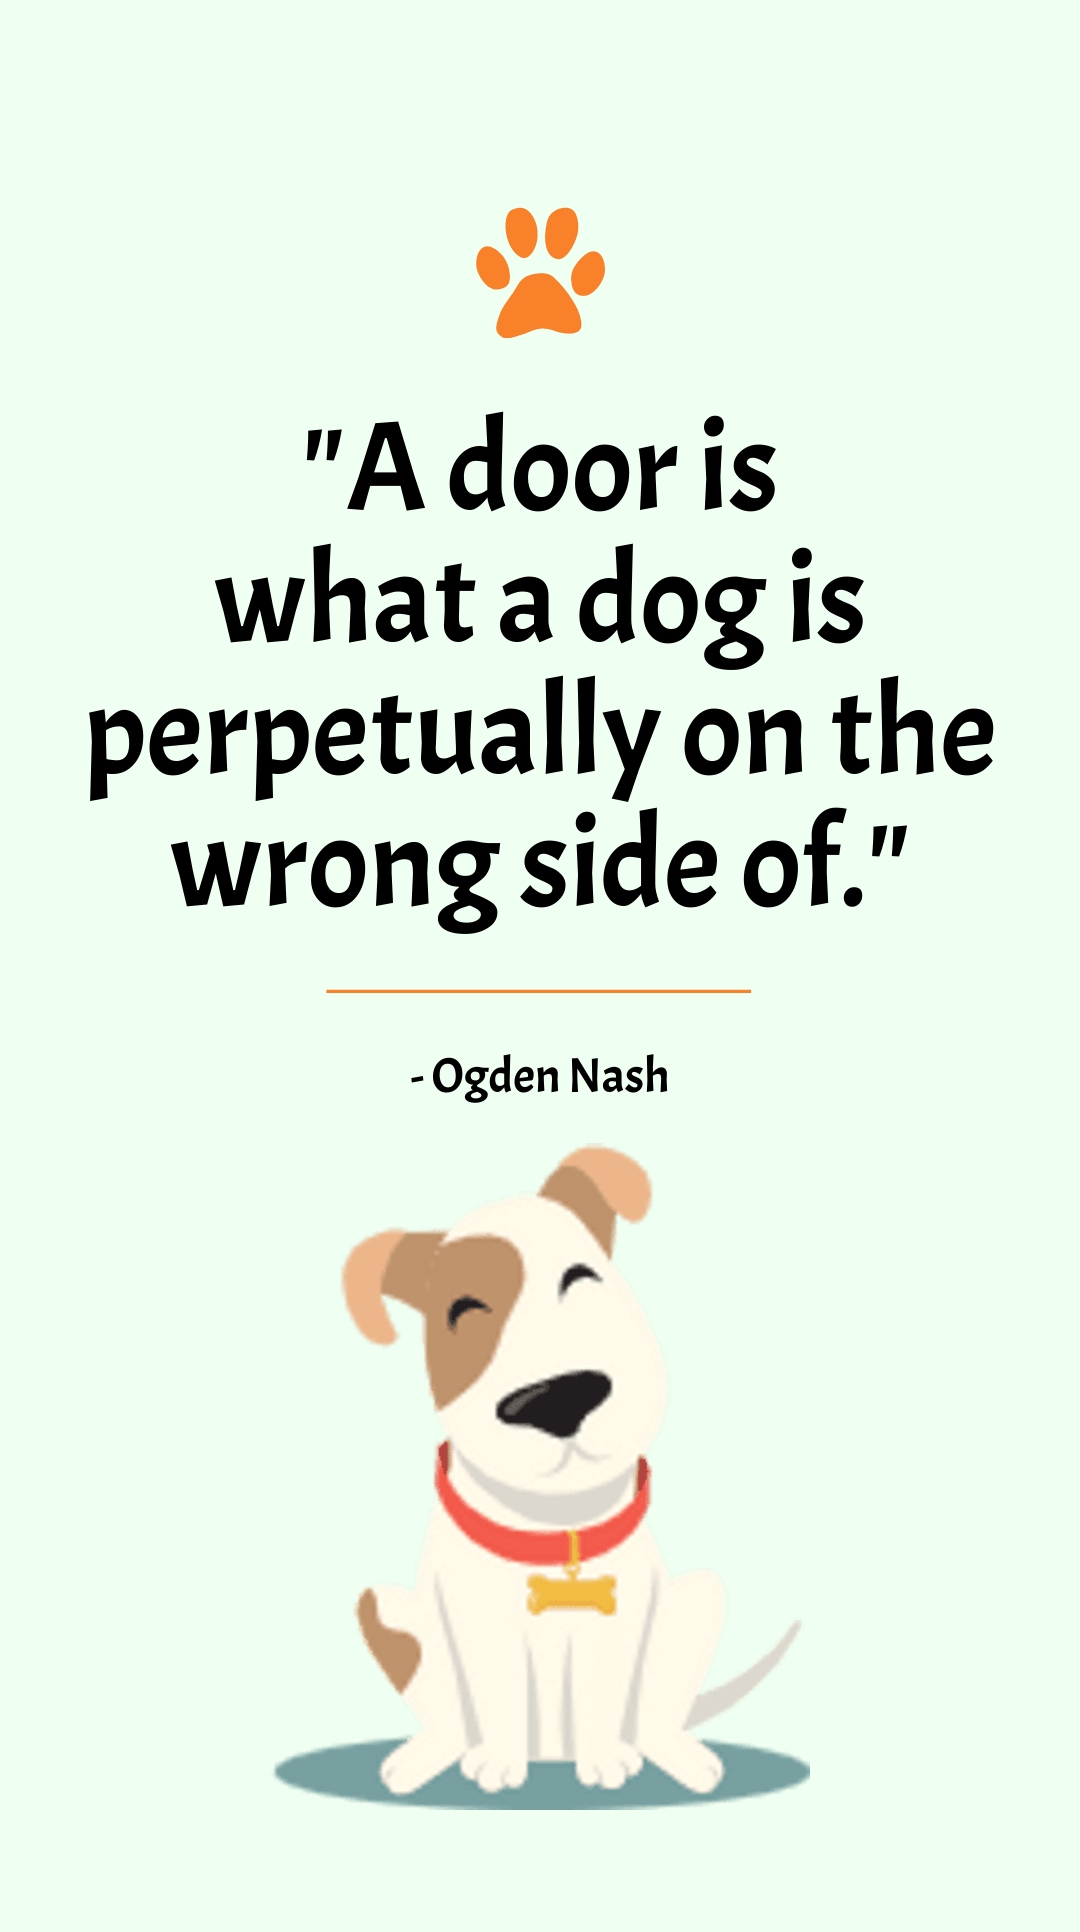 Ogden Nash - A door is what a dog is perpetually on the wrong side of.